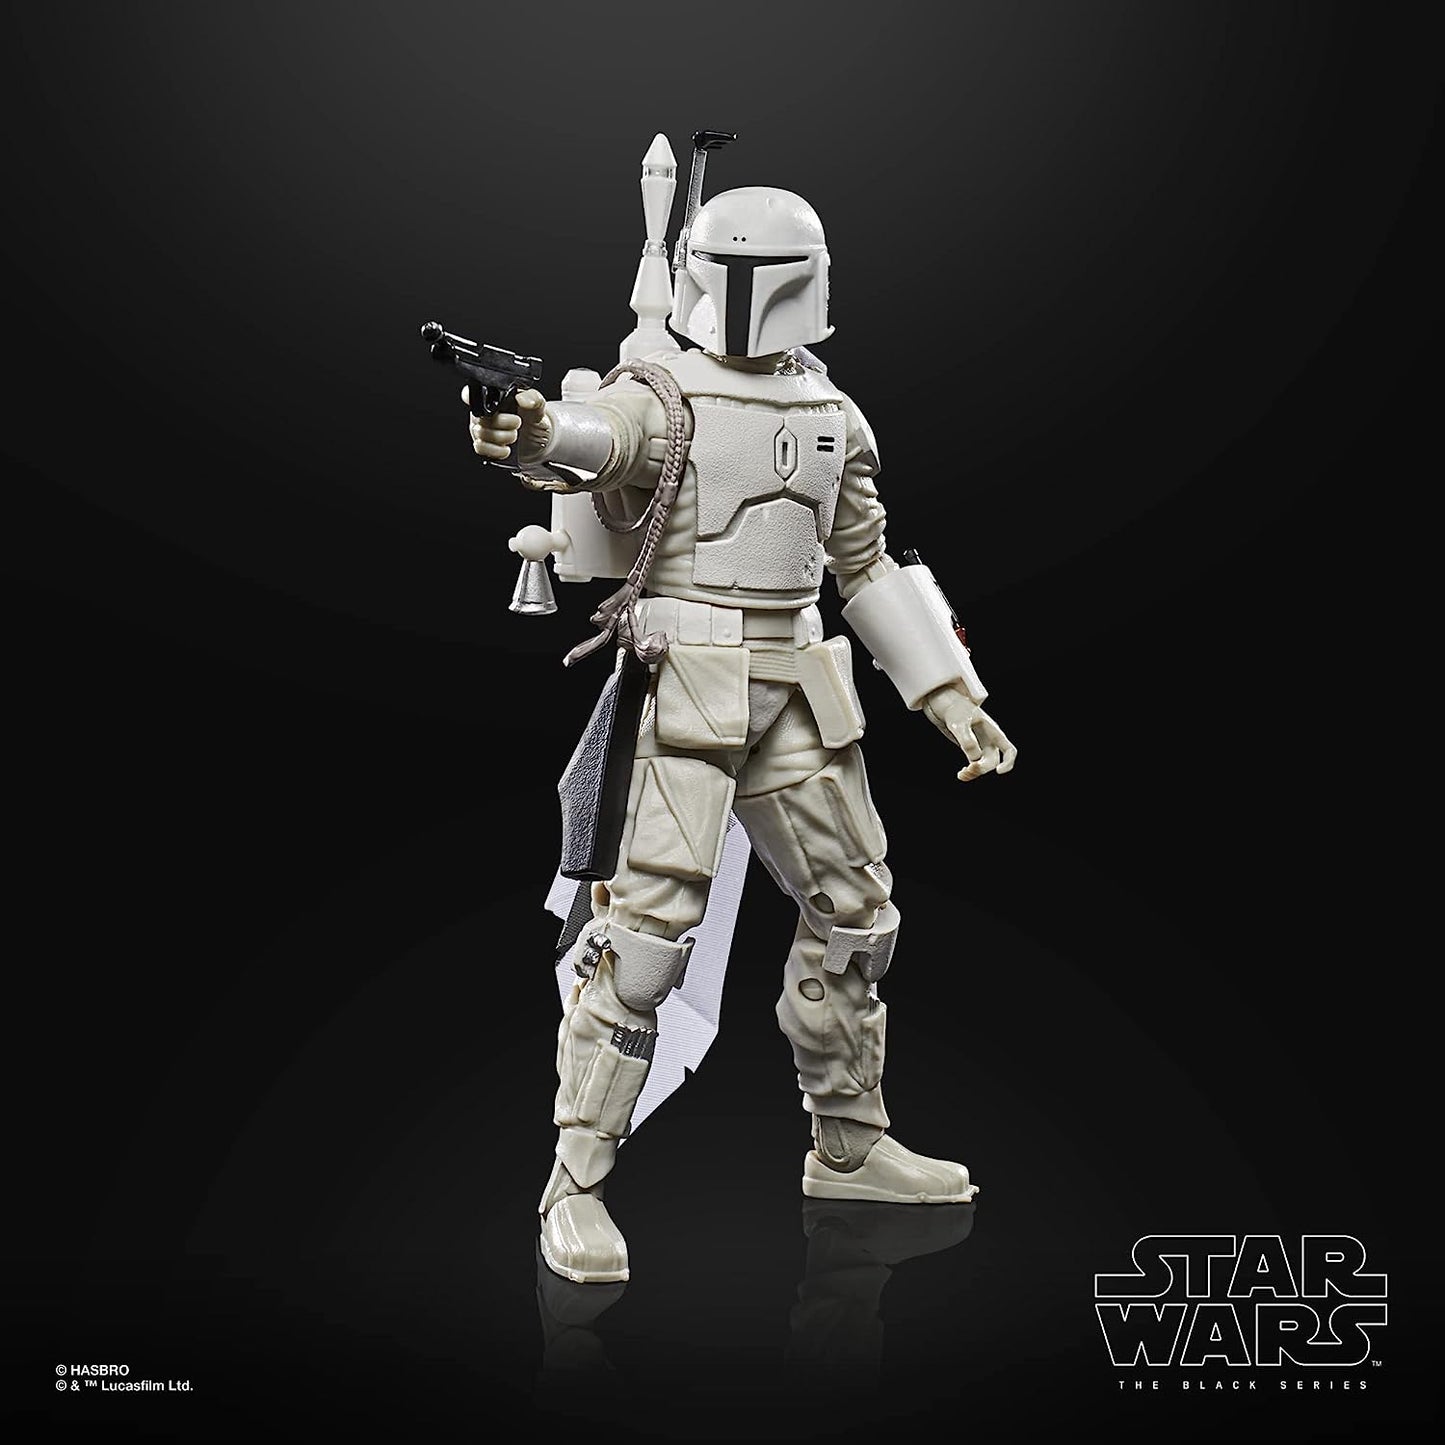 STAR WARS The Black Series Boba Fett (Prototype Armor) Toy 6-Inch-Scale The Empire Strikes Back Collectible Figure, Ages 4 and Up (Amazon Exclusive)